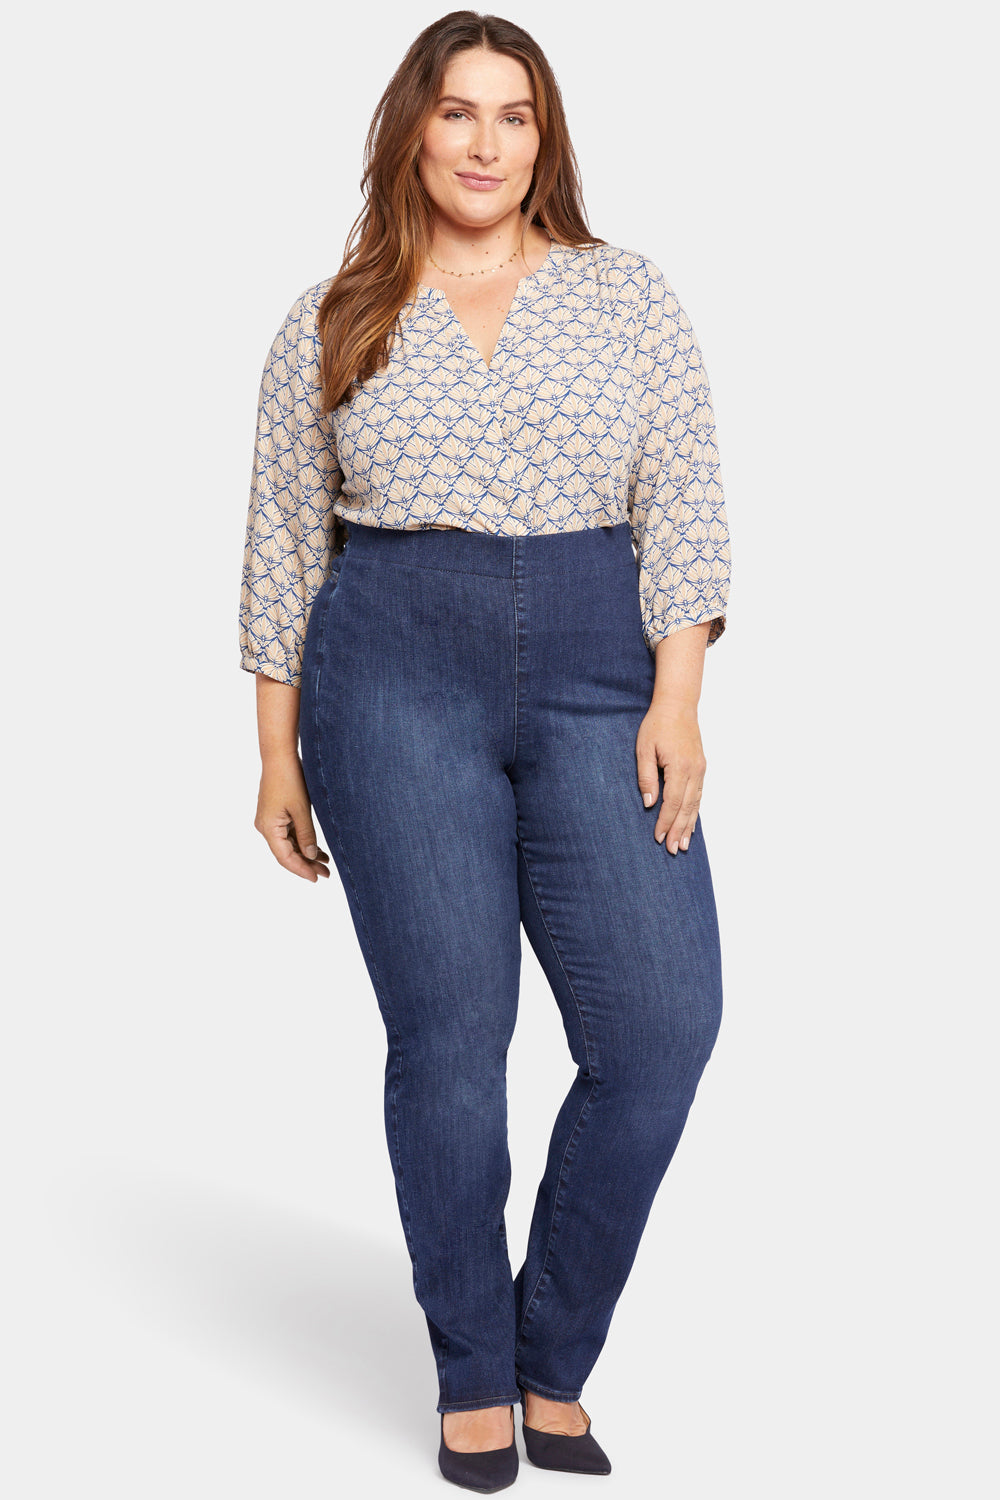 NYDJ Marilyn Straight Pull-On Jeans In Plus Size In SpanSpring™ Denim - Blue Star